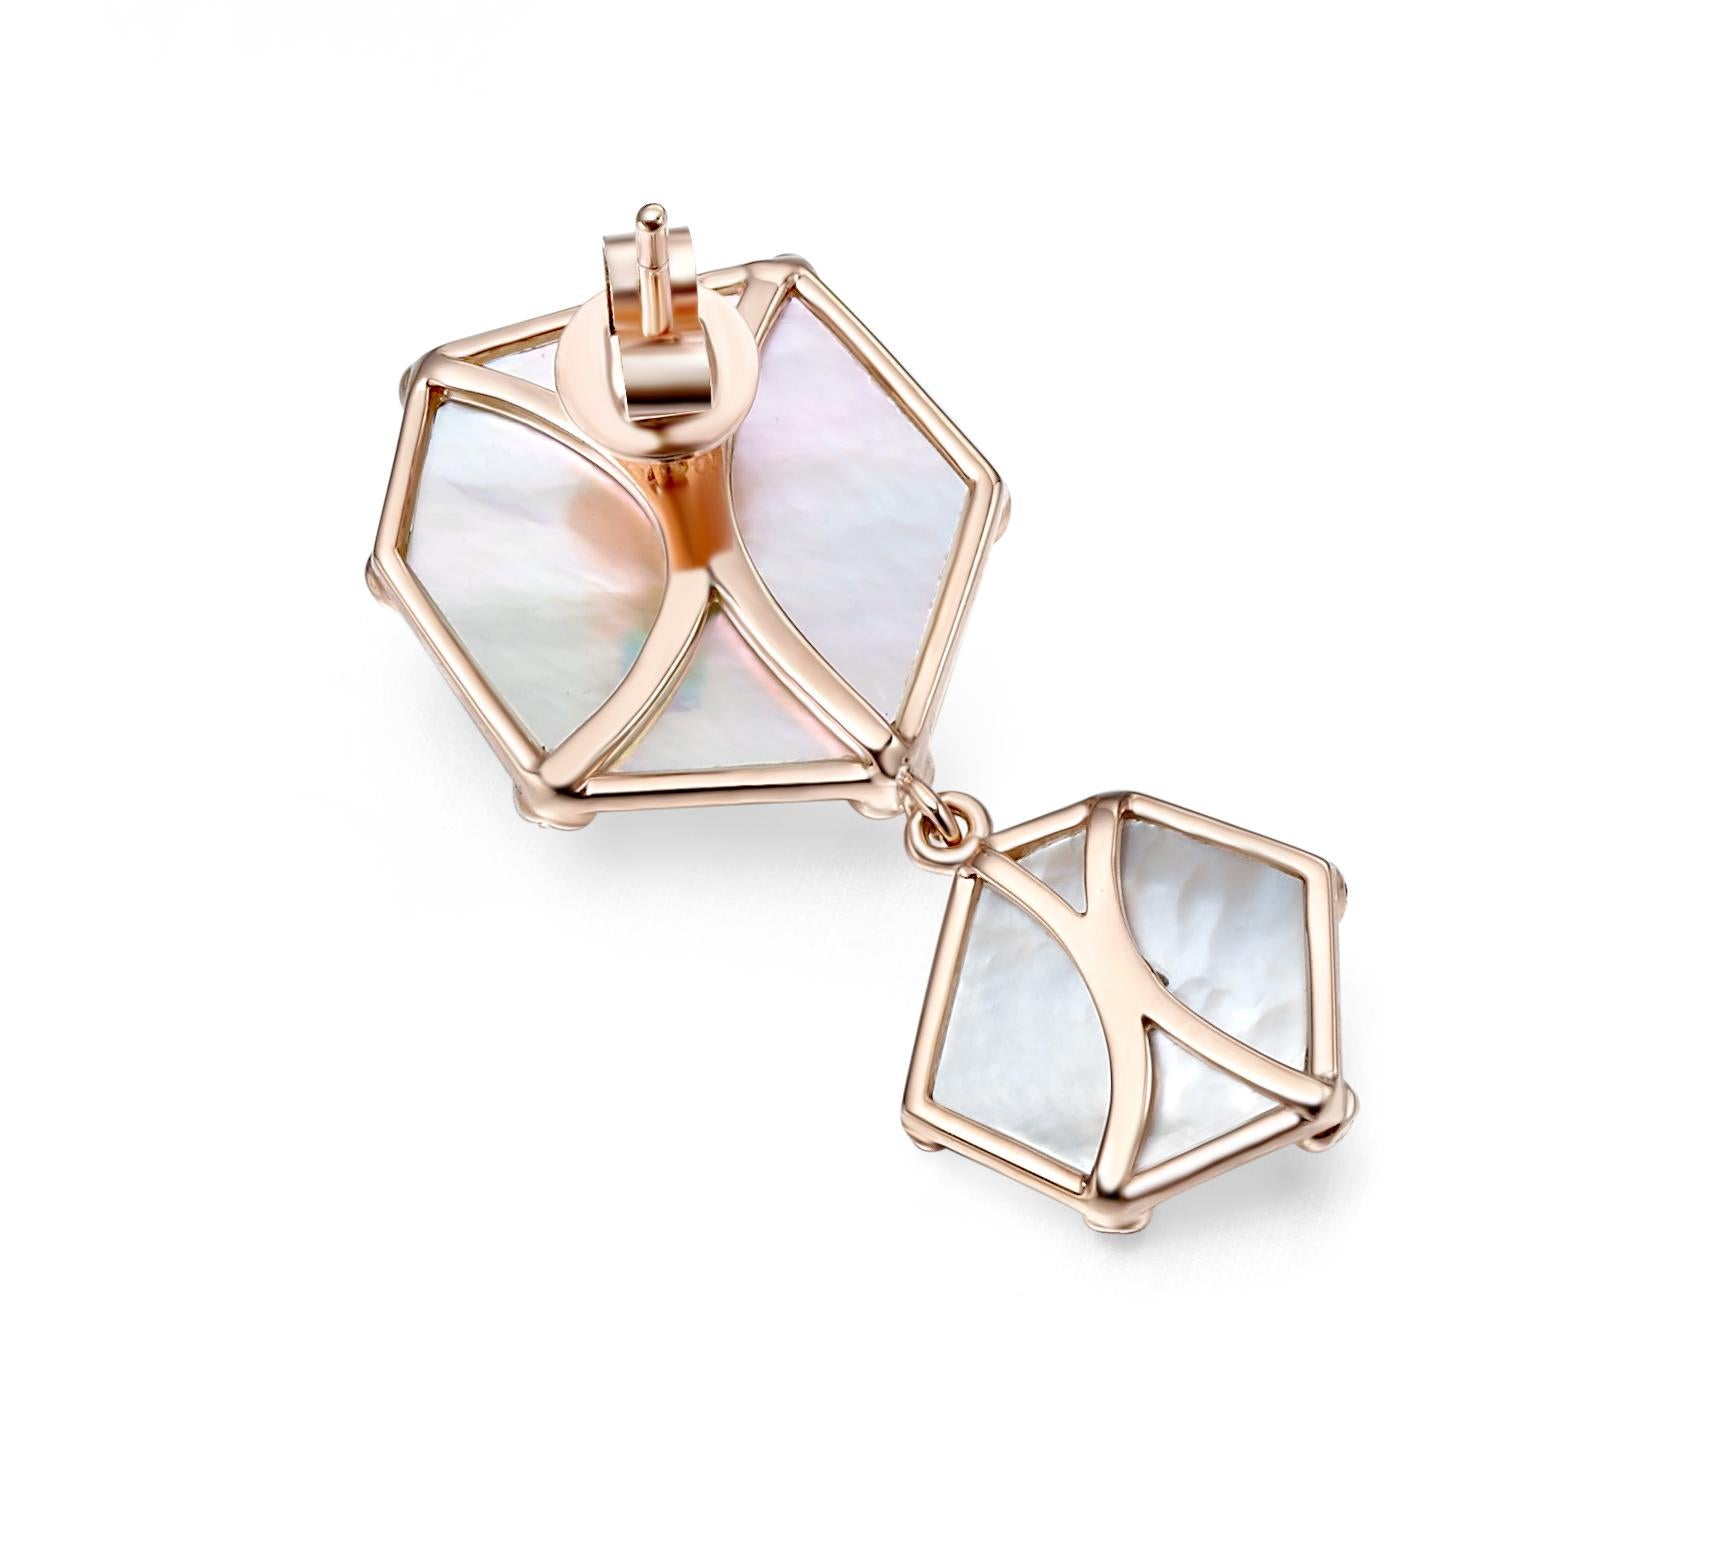 Description:
Nova hexagon stud drop earrings 0.268ct pink sapphires and 10ct mother of pearl, set in 18ct rose gold with a high polish.

Inspiration
The Nova Collection embodies the essence of freedom and having the courage to explore new adventures